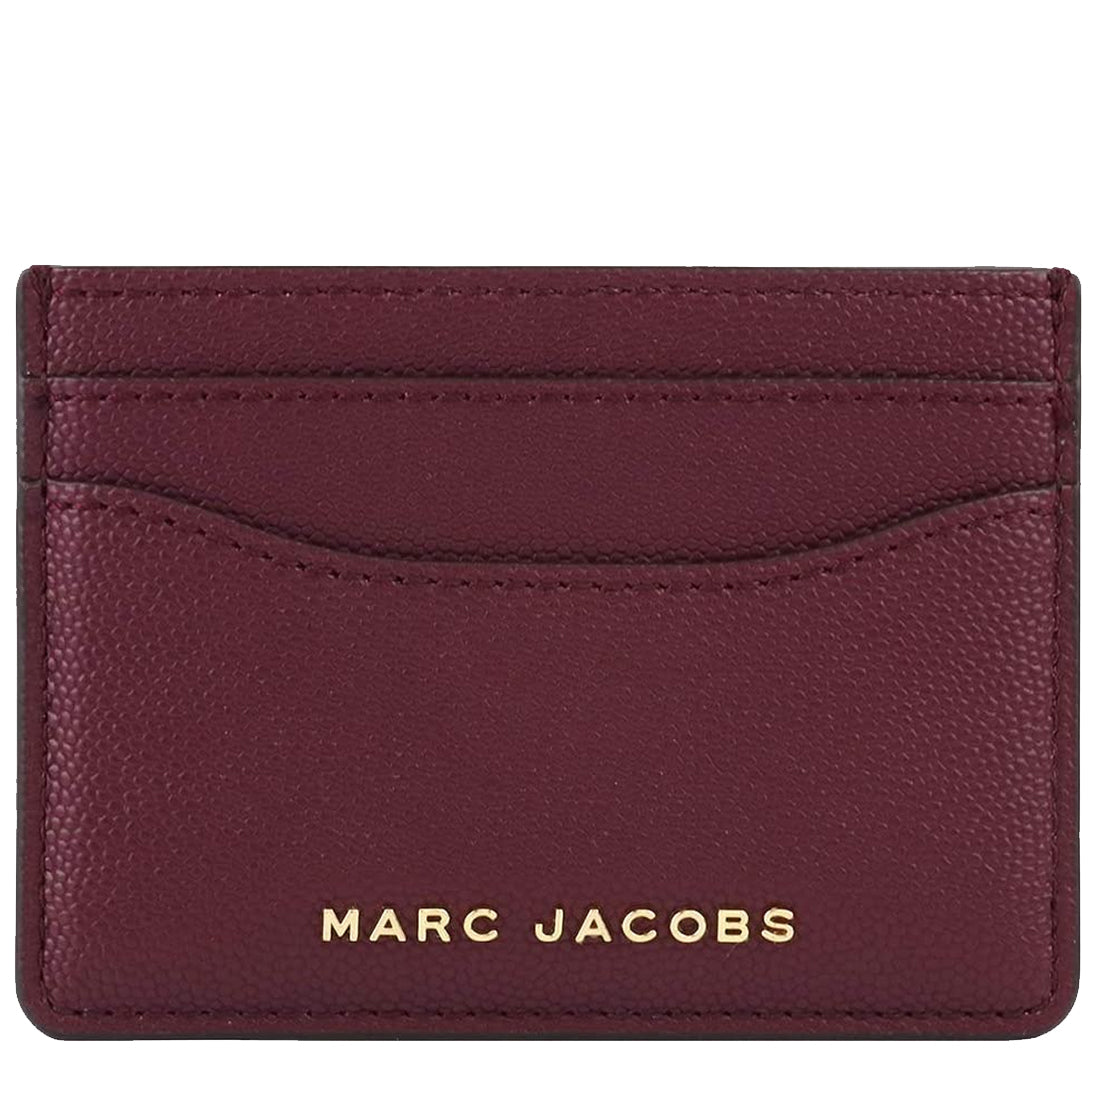 Marc Jacobs Daily Card Case in Deep Purple M0016997 – PinkOrchard.com